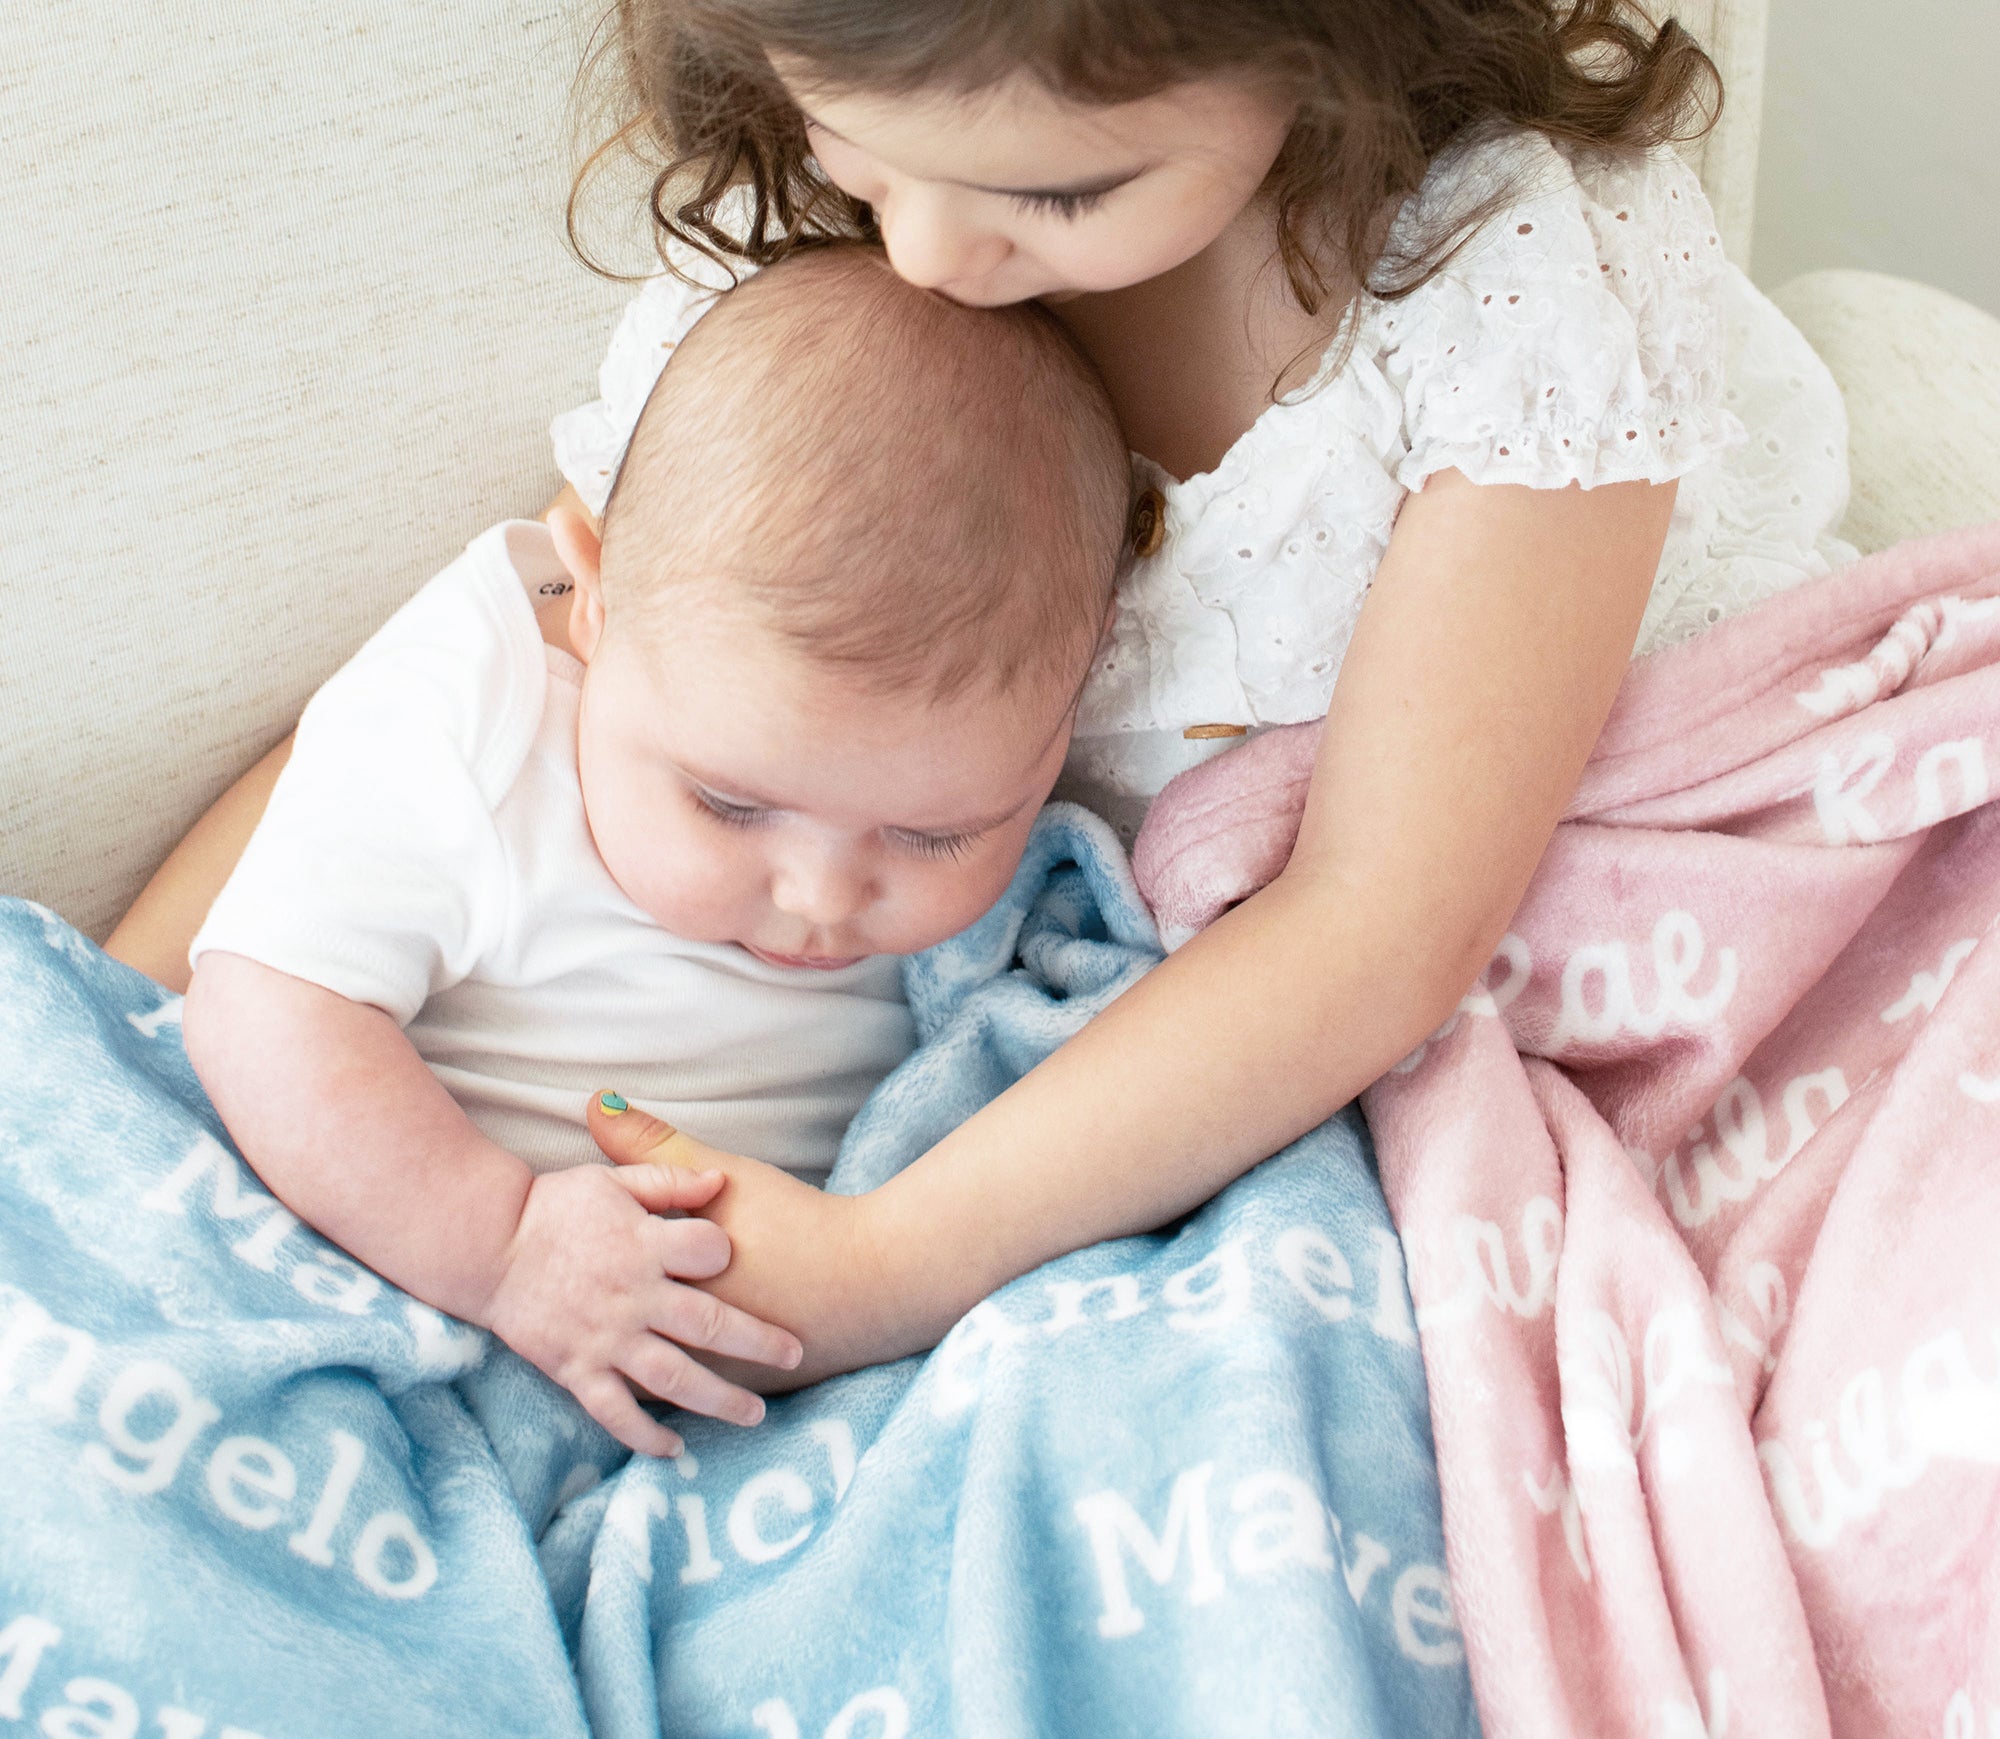 Mish Mash Deals - PERSONALIZED CHEVRON MINKY BABY BLANKETS